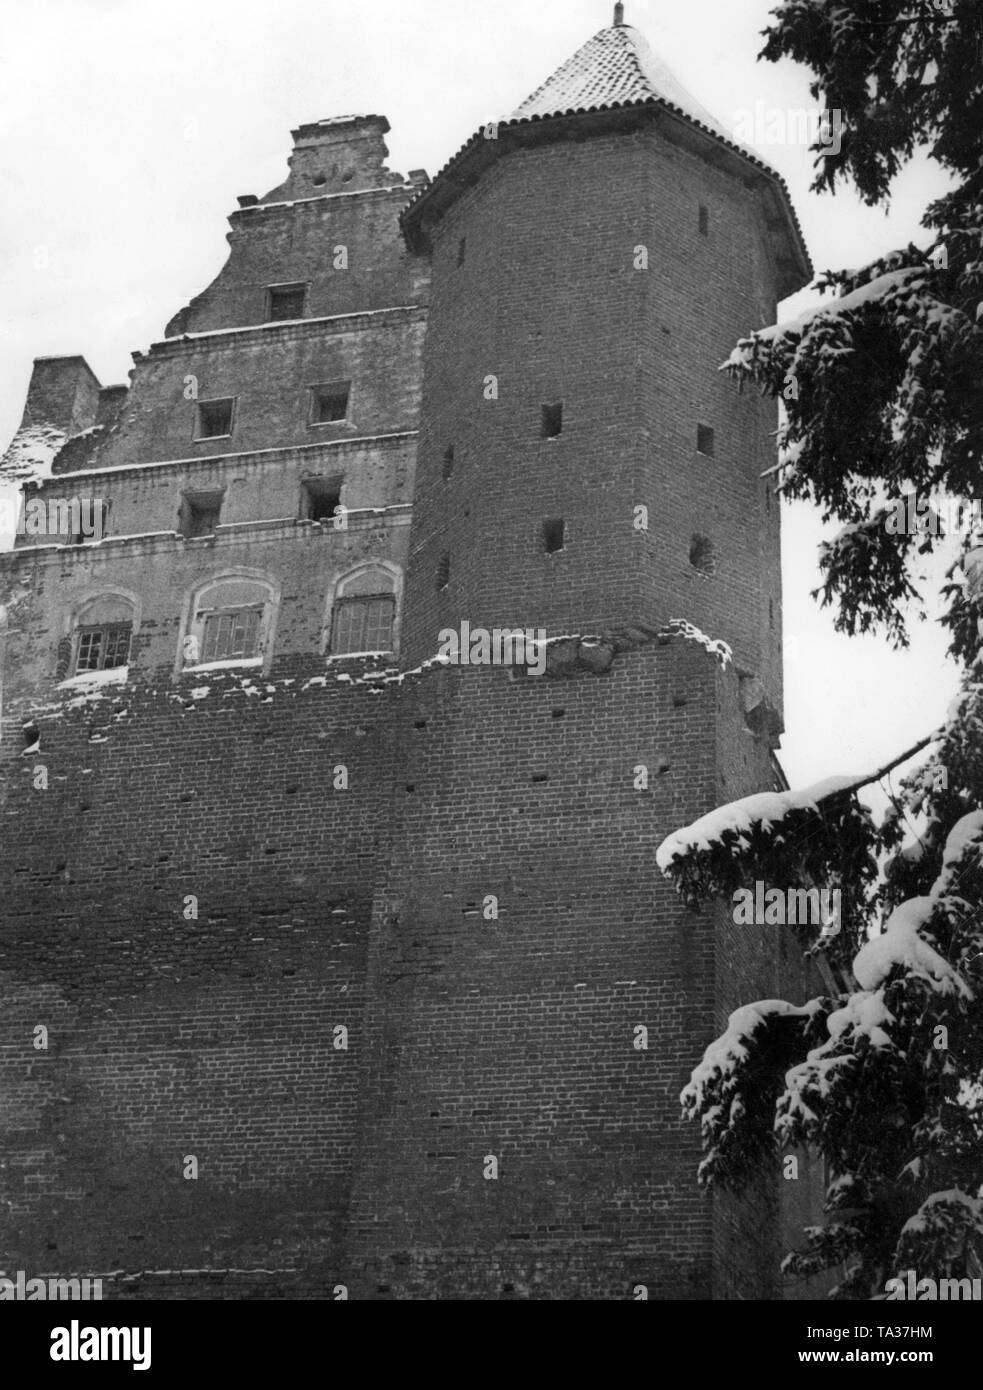 Pictured is the northwest tower of the castle complex Schoenberg at Ilawa in East Prussia / Germany with the front of the kitchen wing. Stock Photo